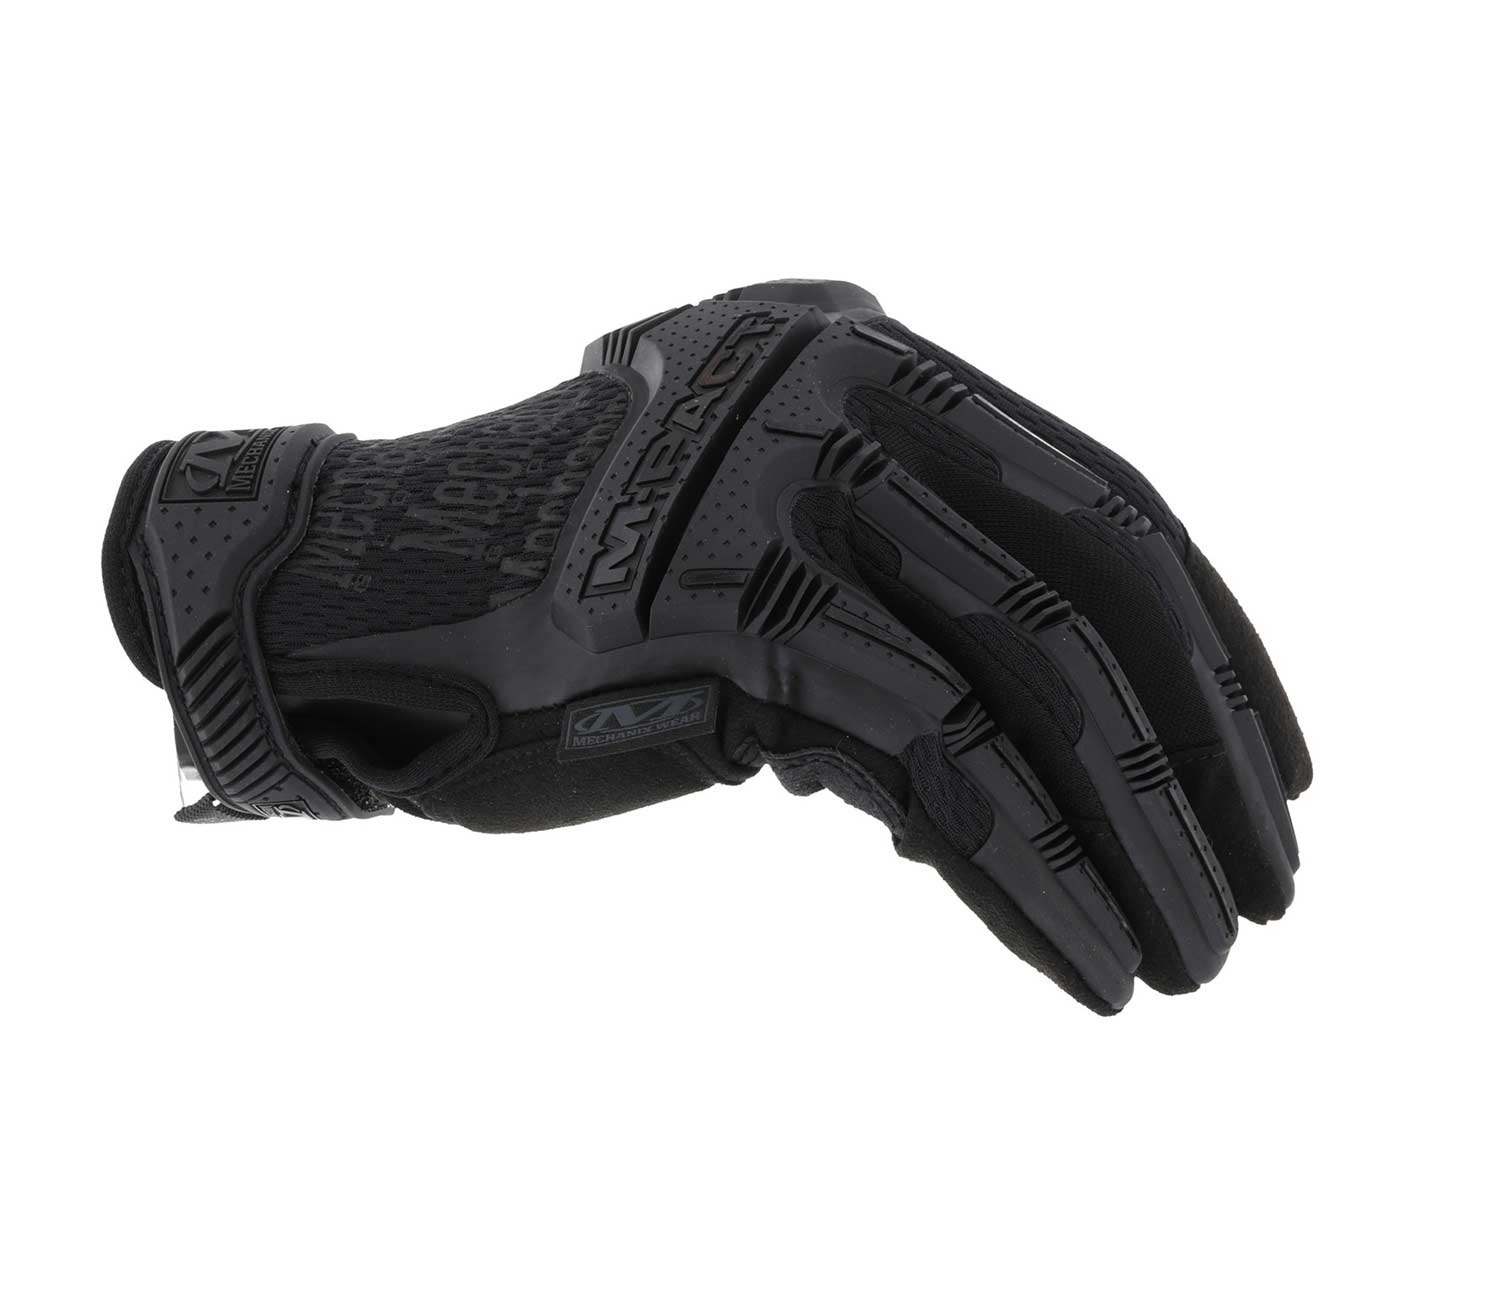 Guantes Mechanix M-Pact lateral negro